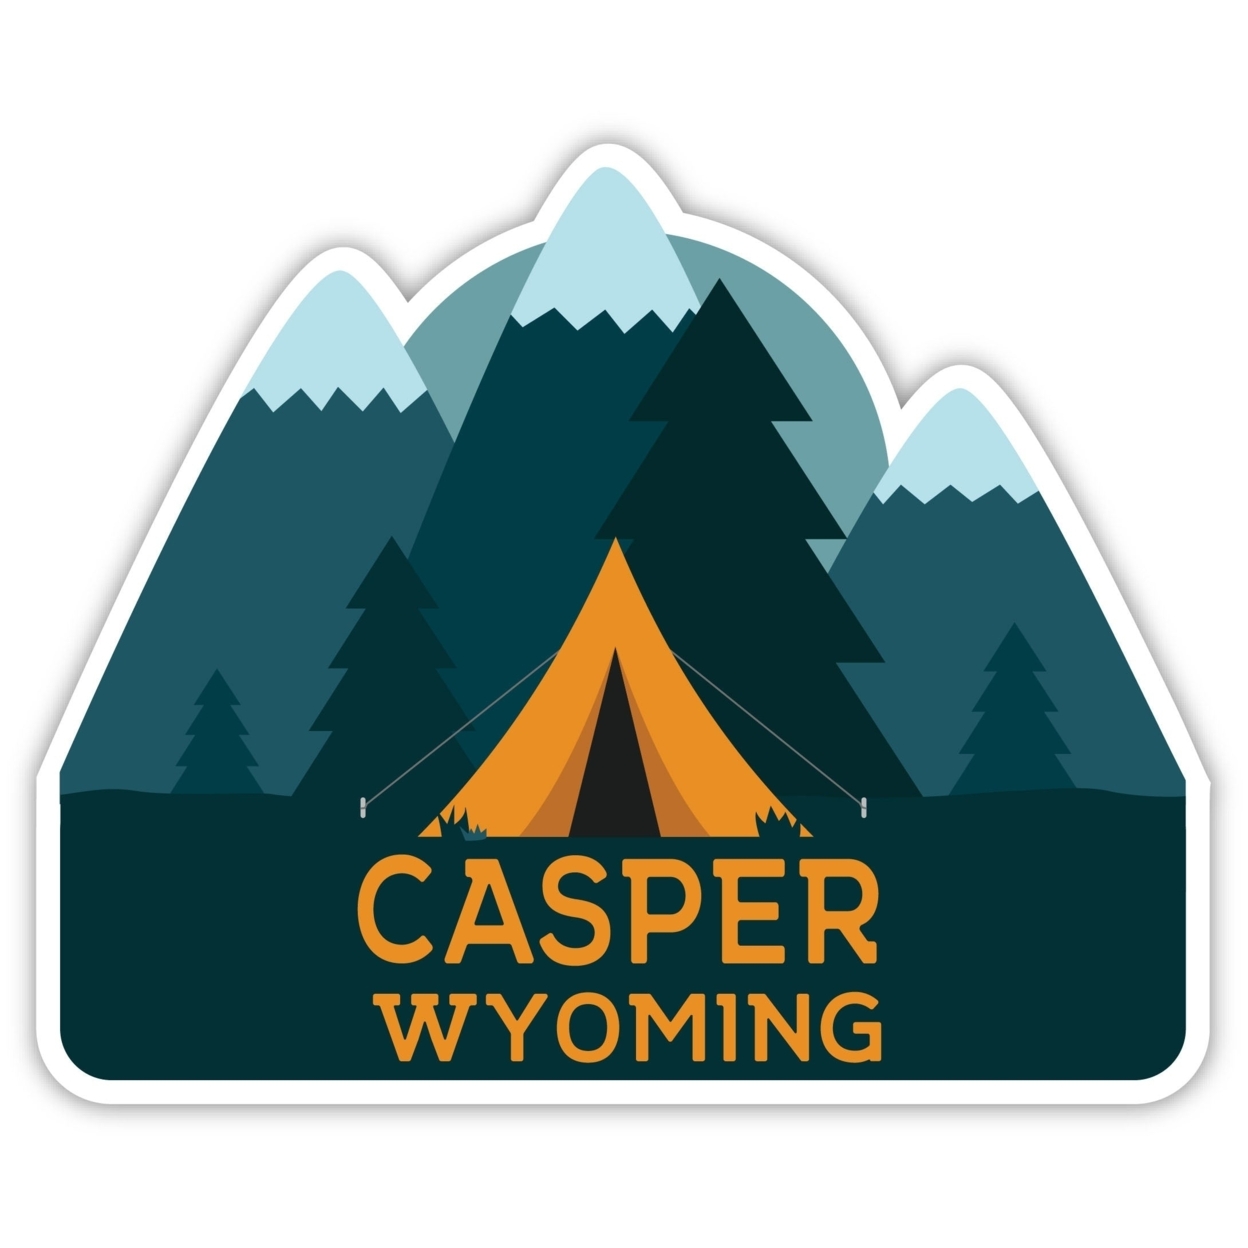 Casper Wyoming Souvenir Decorative Stickers (Choose Theme And Size) - 4-Pack, 4-Inch, Bear